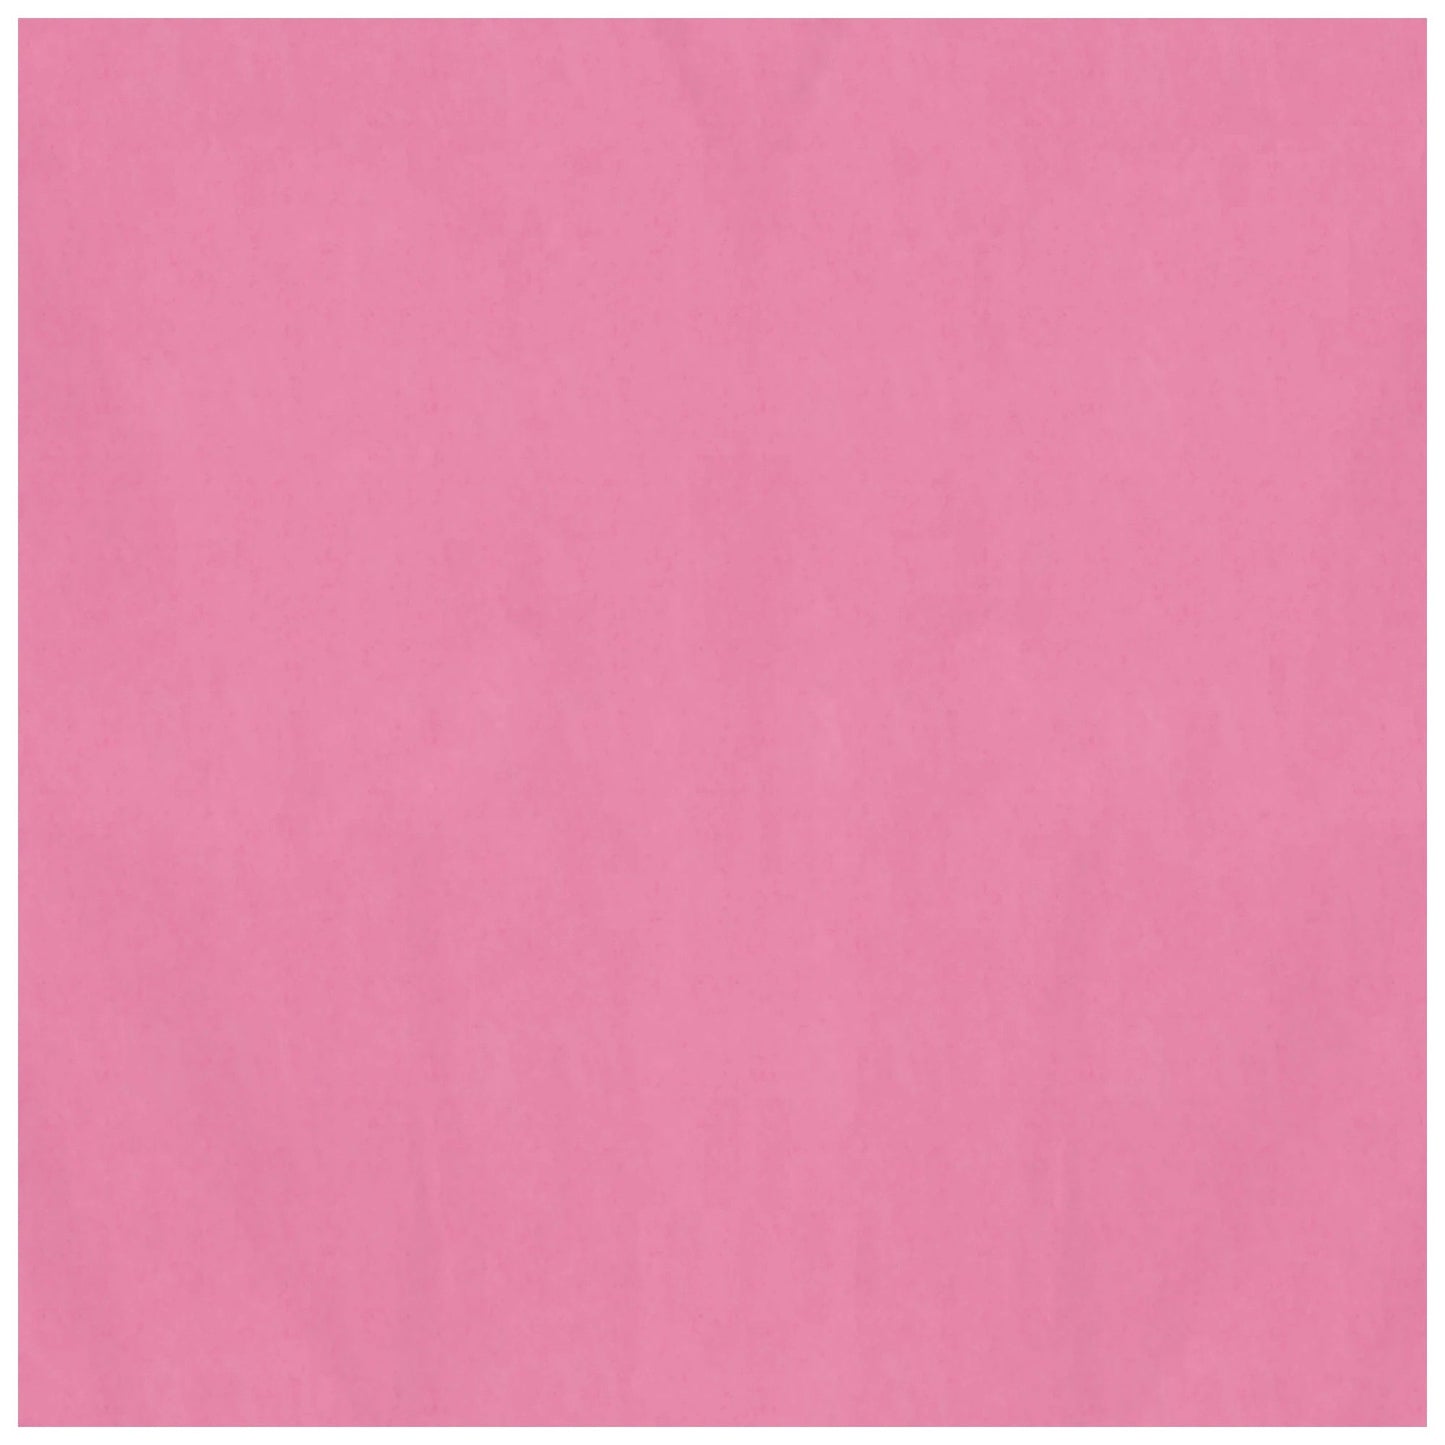 Pink Solid Tissue, 8ct